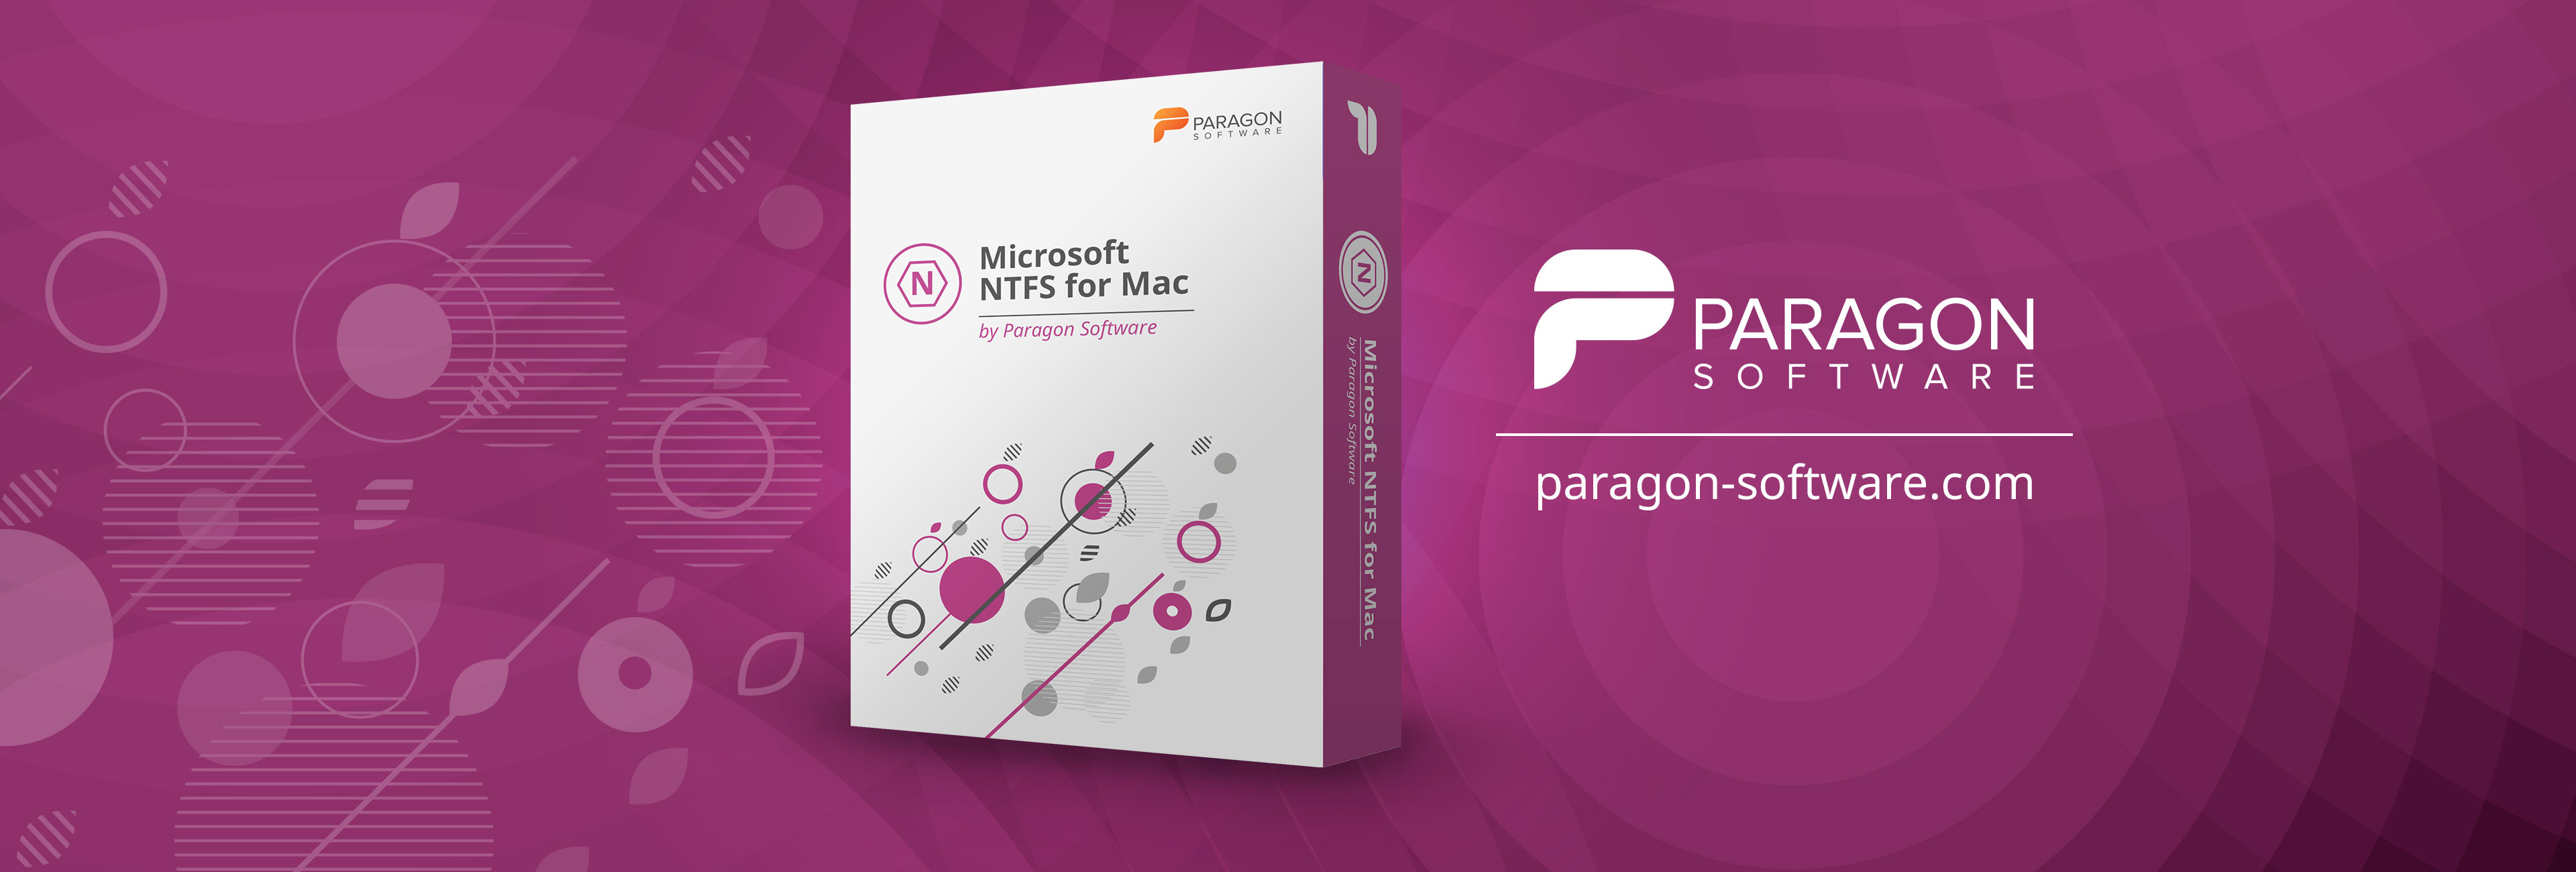 how did i get paragon ntfs for mac